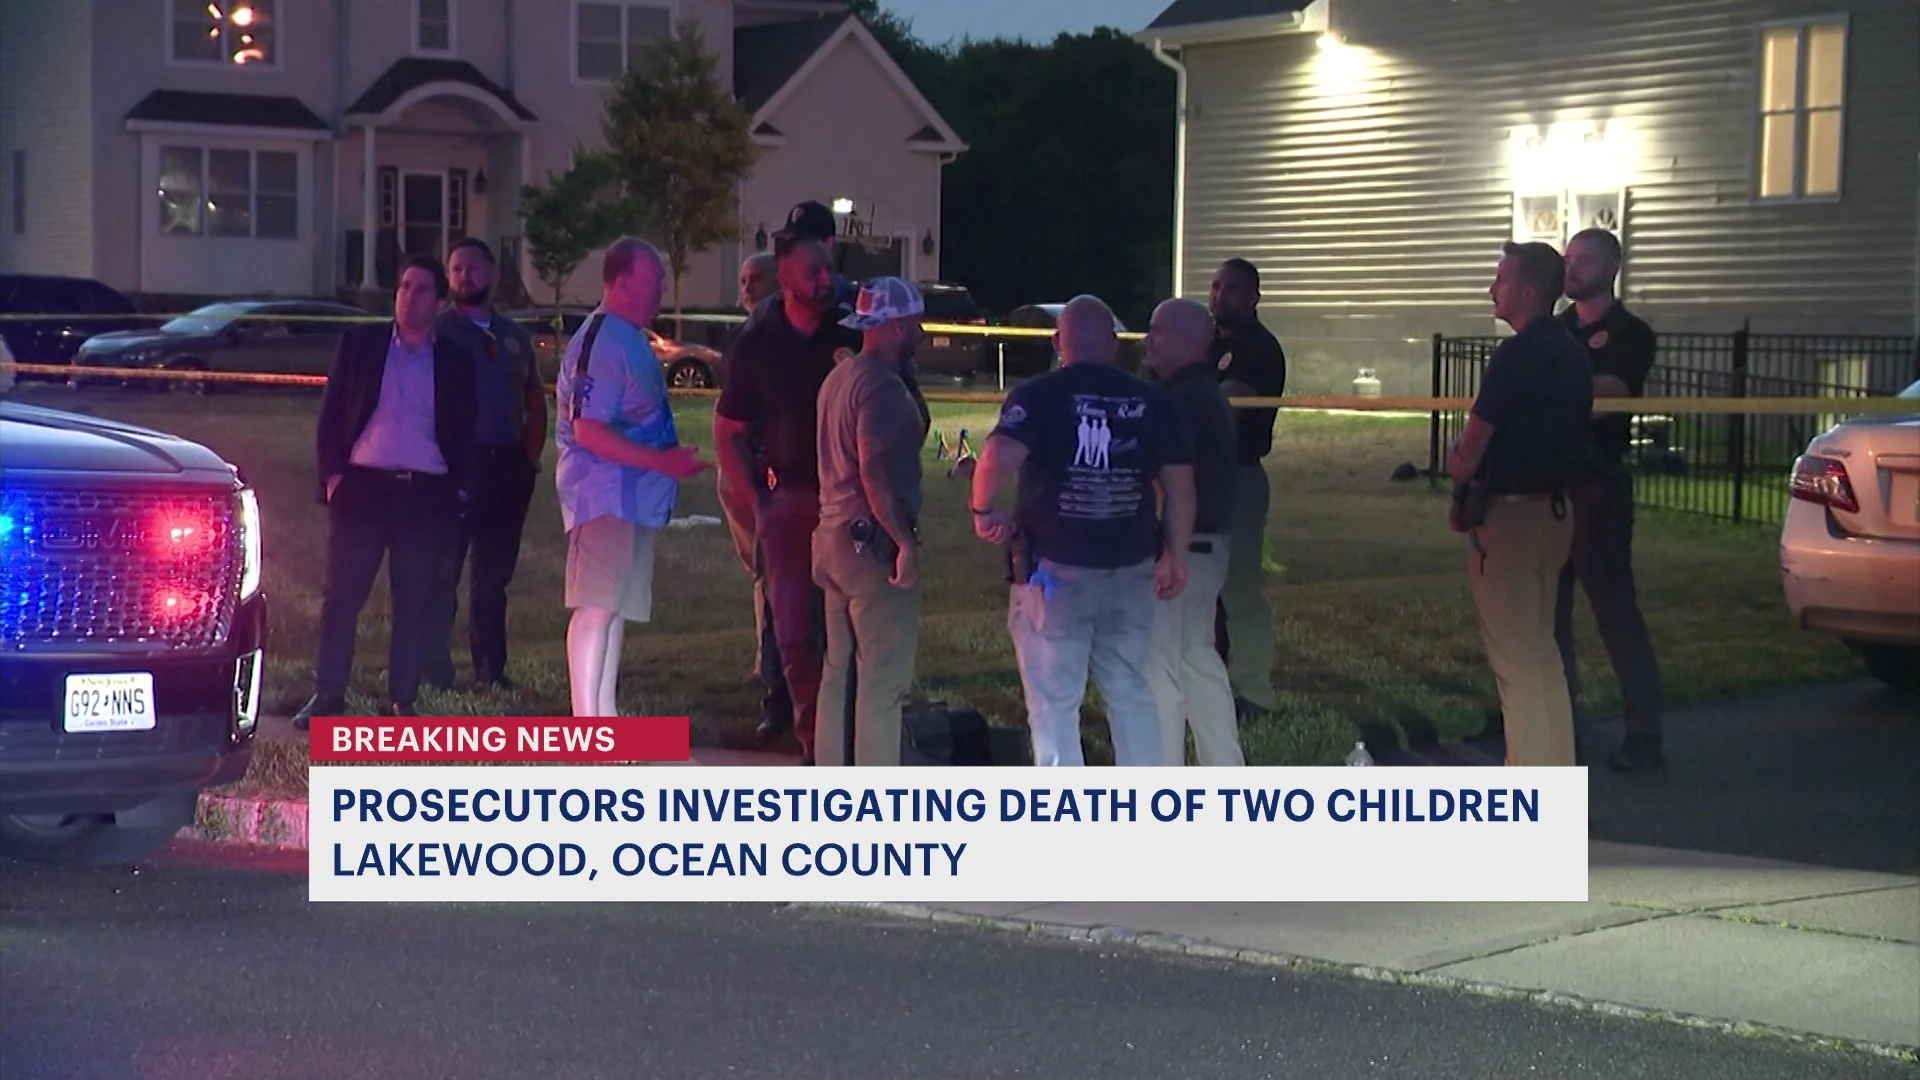 Police investigating deaths of 2 children in Lakewood